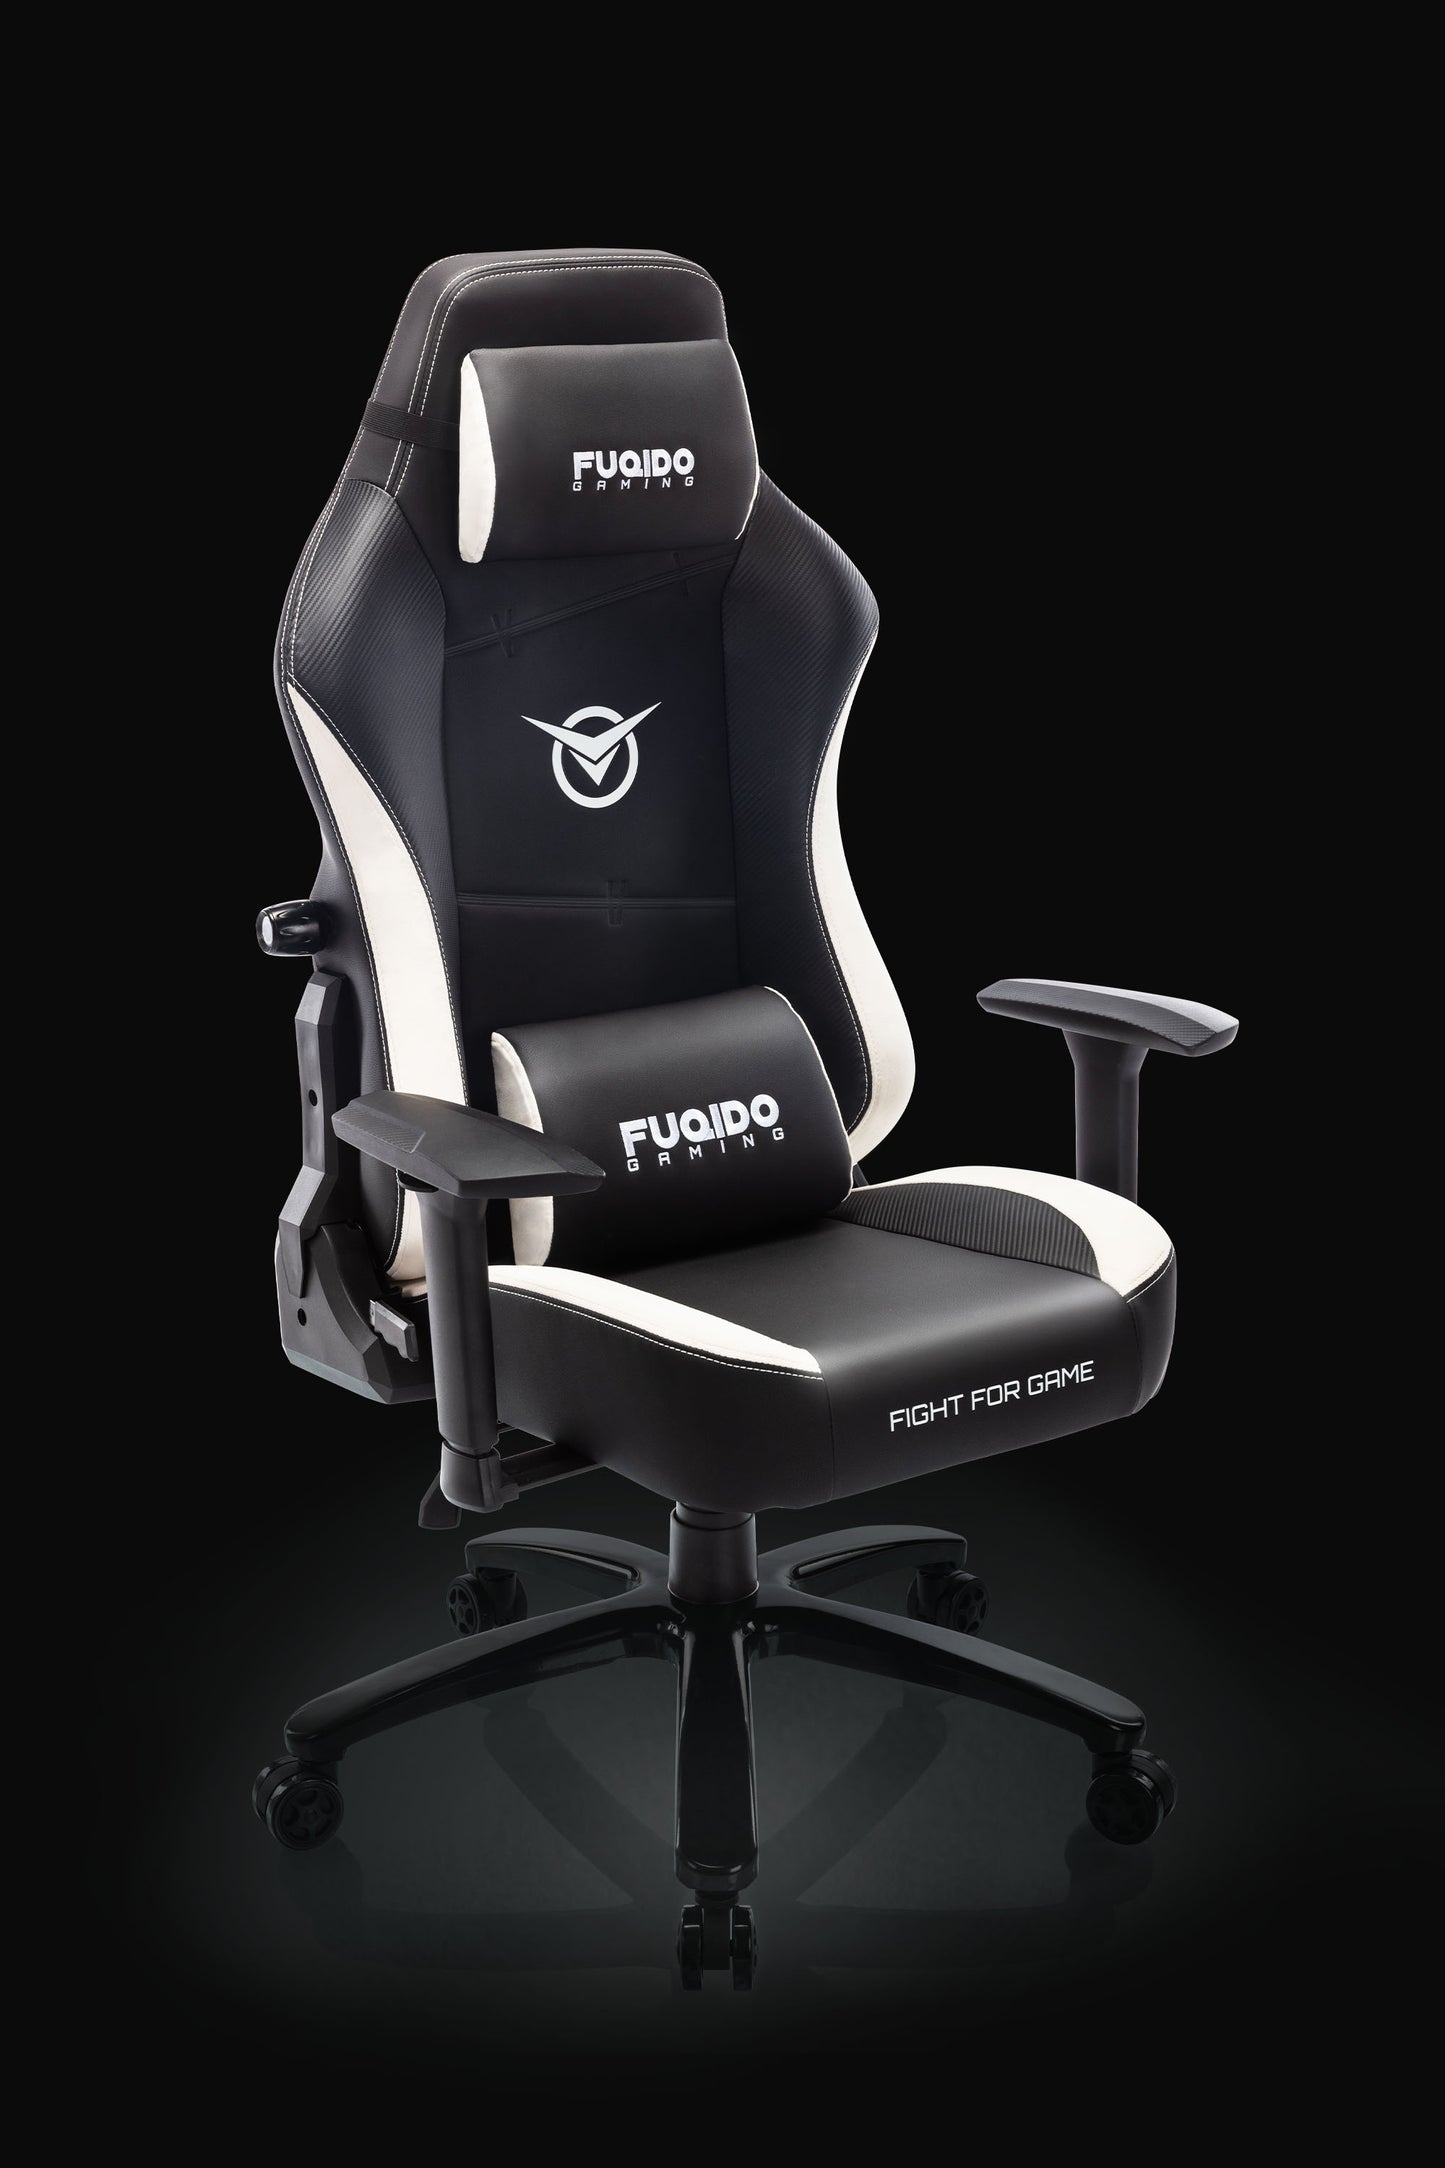 FUQIDO big and tall gaming chair with built-in lumbar support 5110 series black and white#color_white